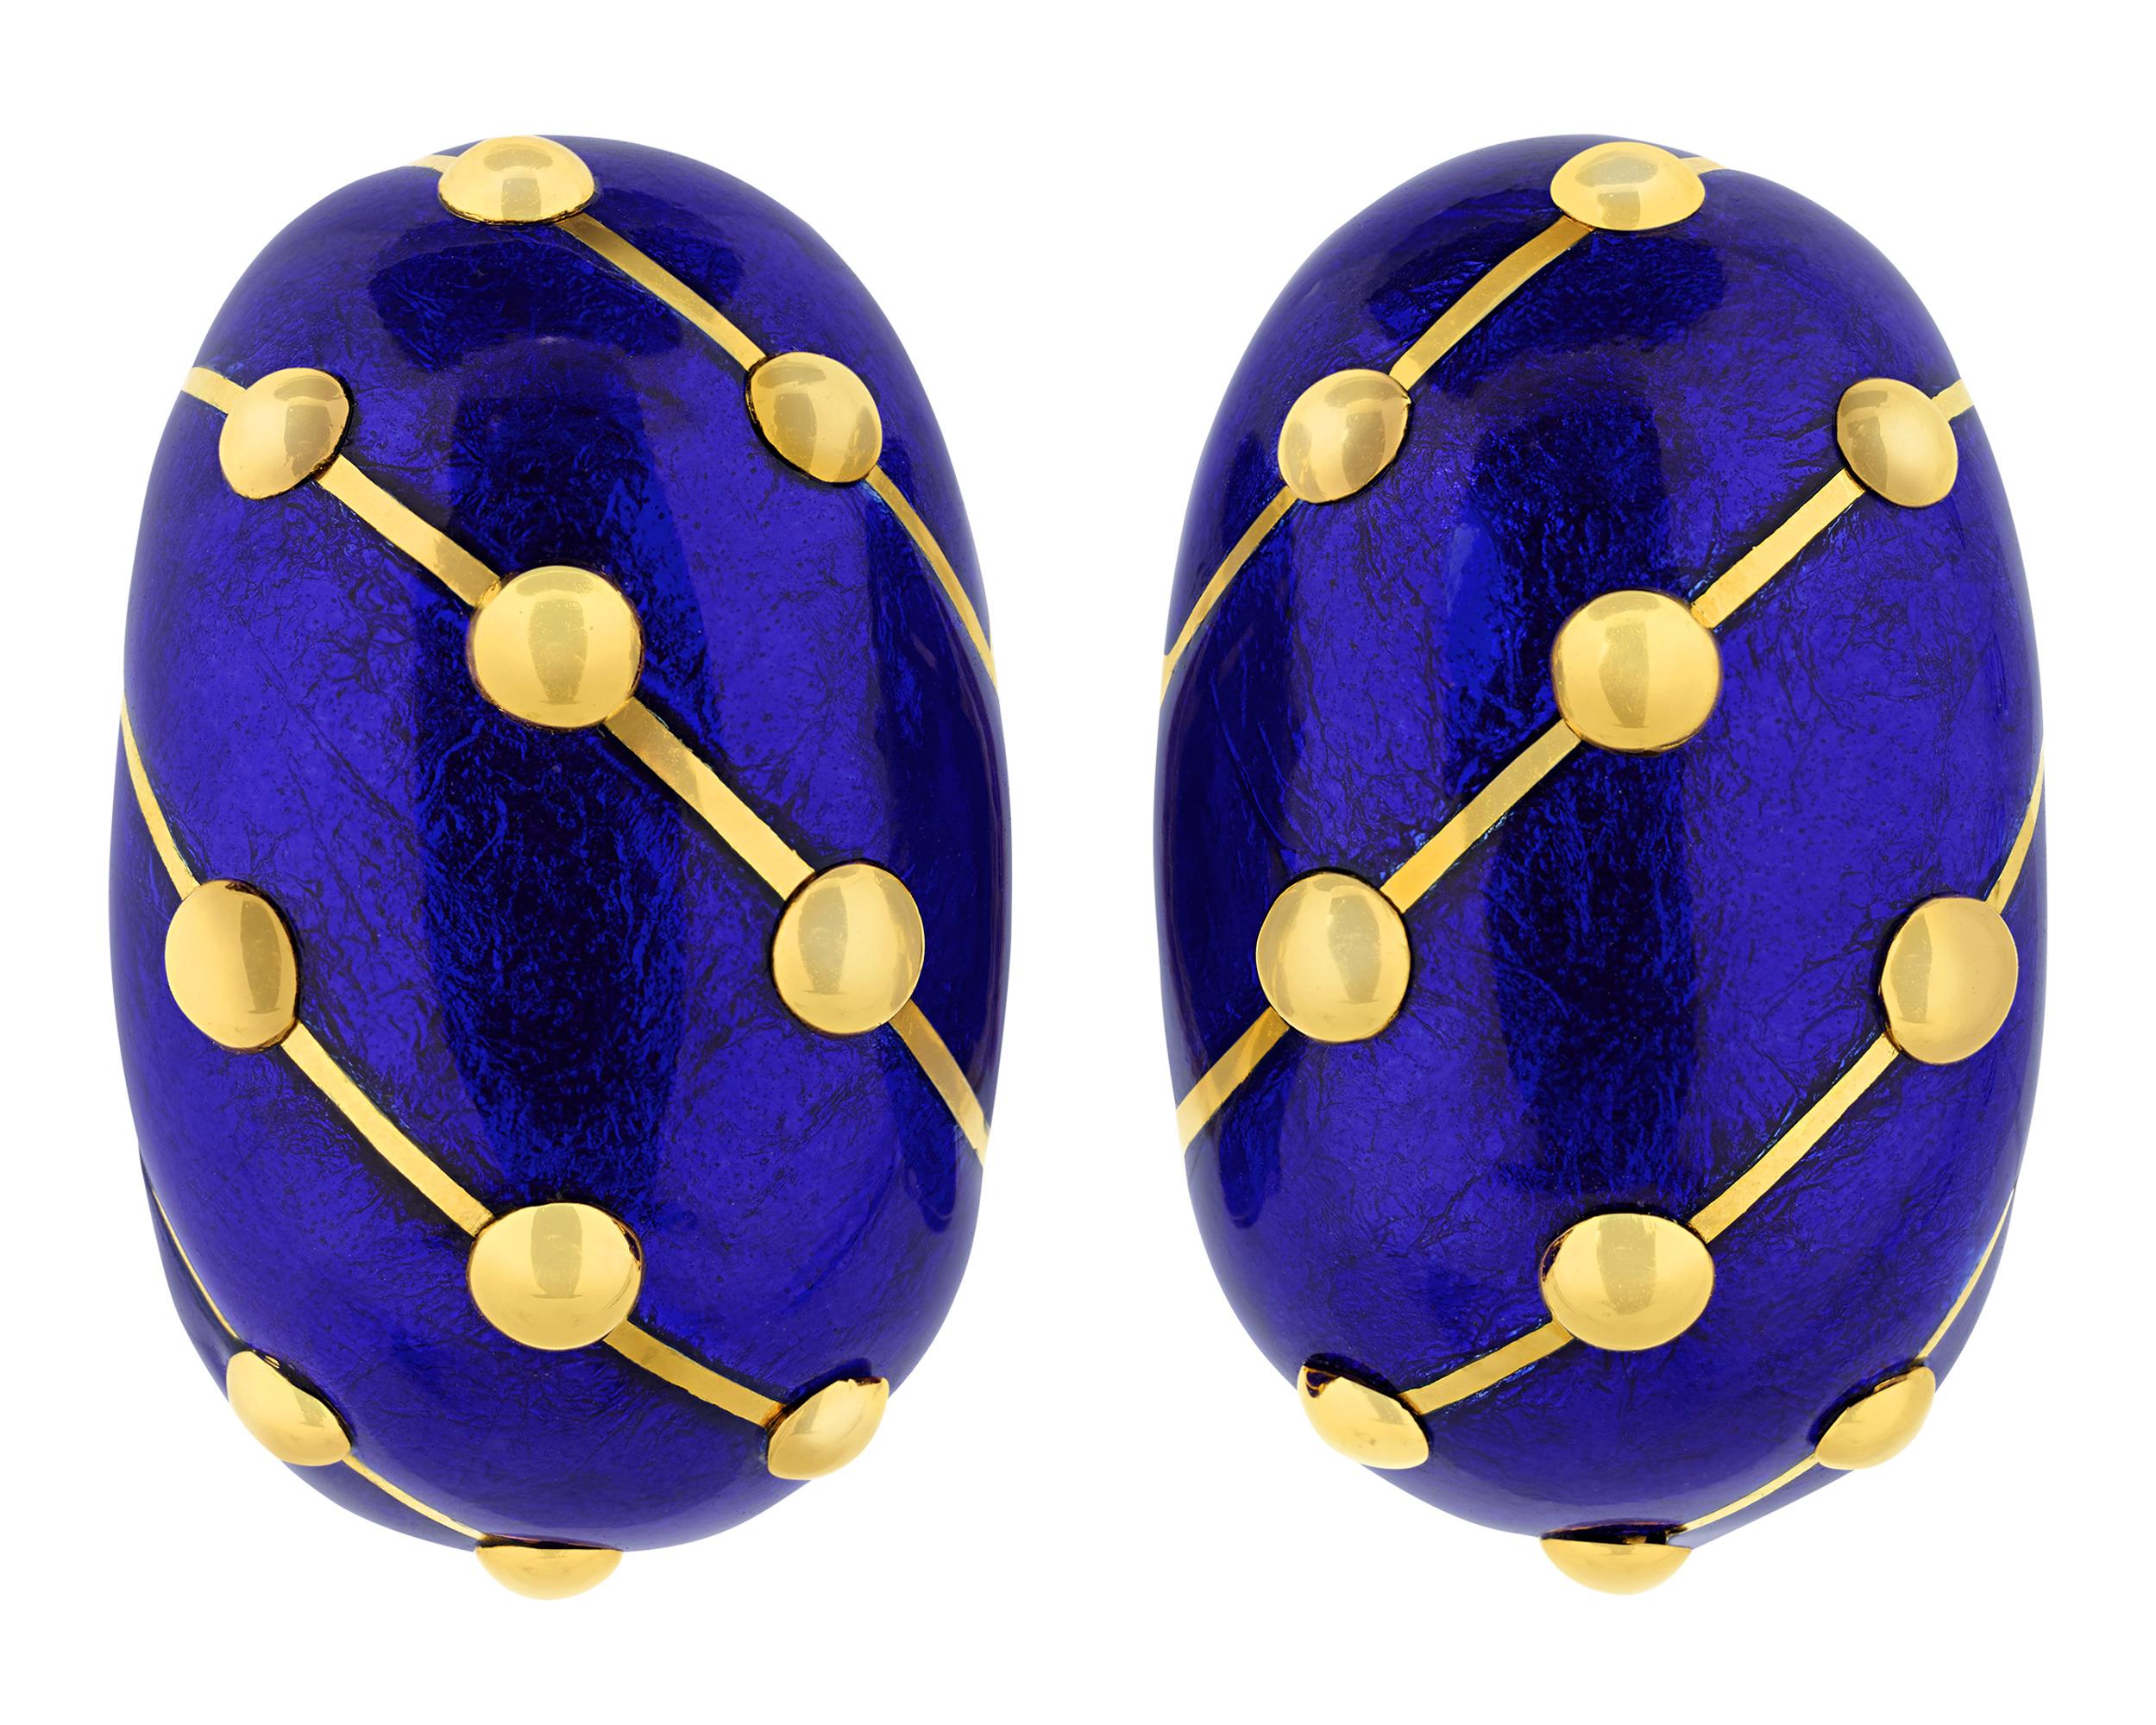 Blue Enamel Earrings By Jean Schlumberger For Tiffany & Co In Excellent Condition For Sale In New Orleans, LA